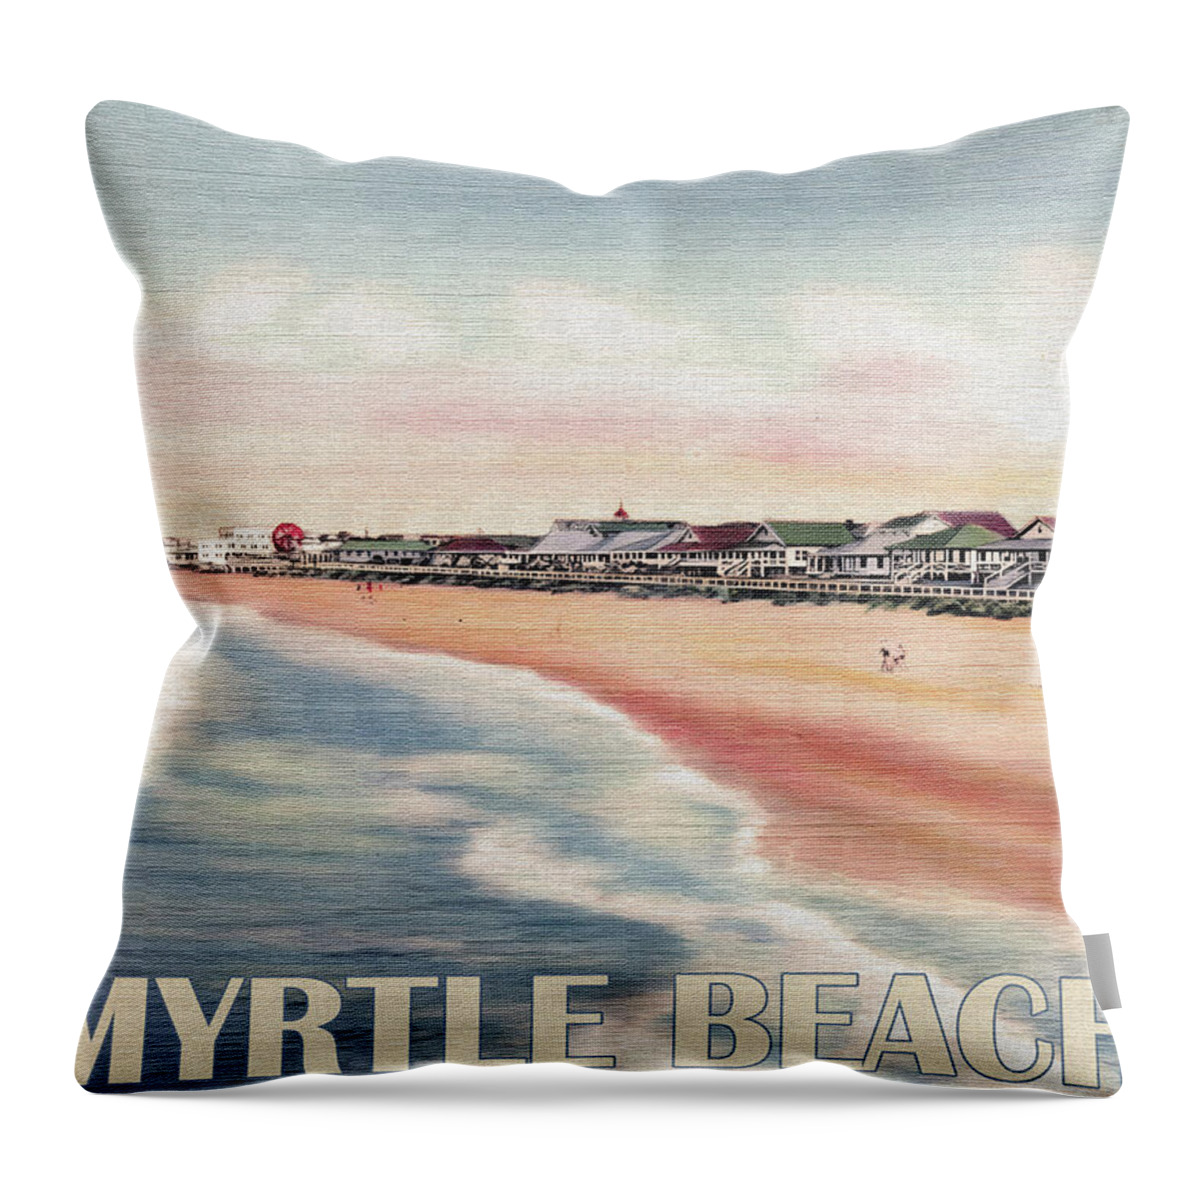 Myrtle Beach Throw Pillow featuring the photograph Myrtle Beach Photo by Long Shot